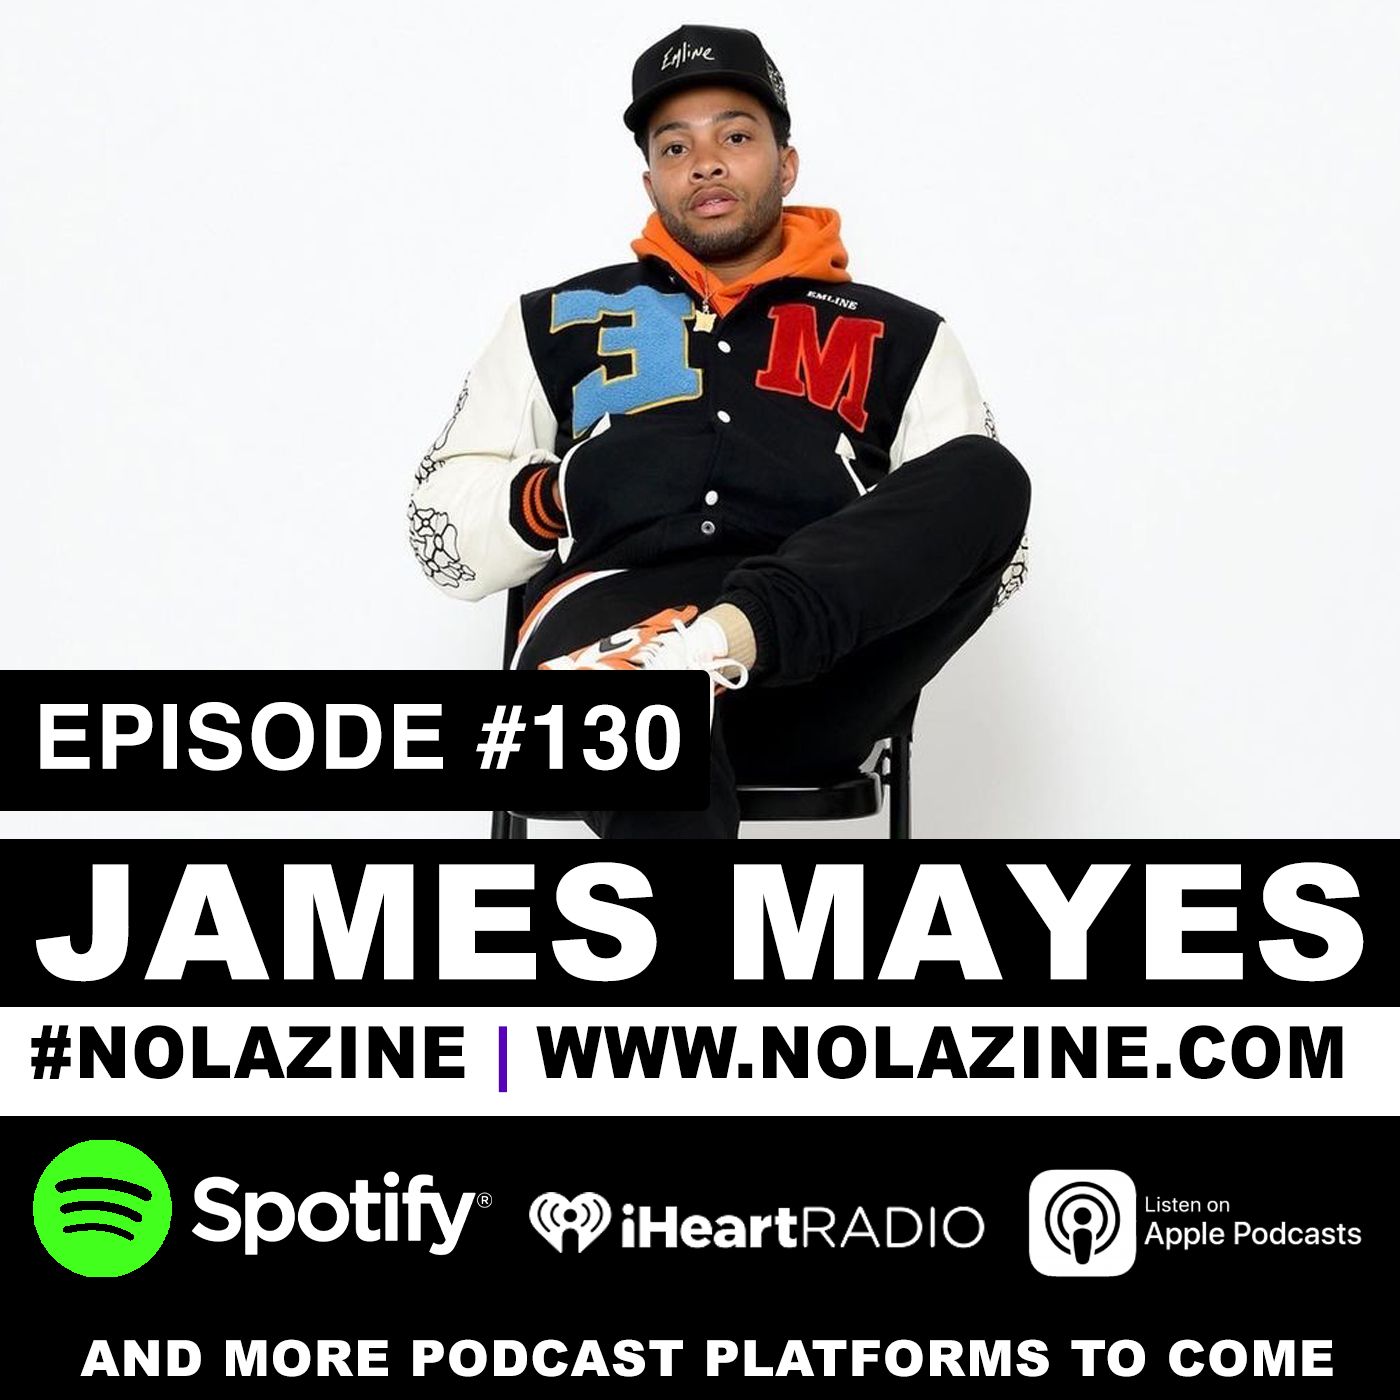 EP: 130 Featuring James Mayes